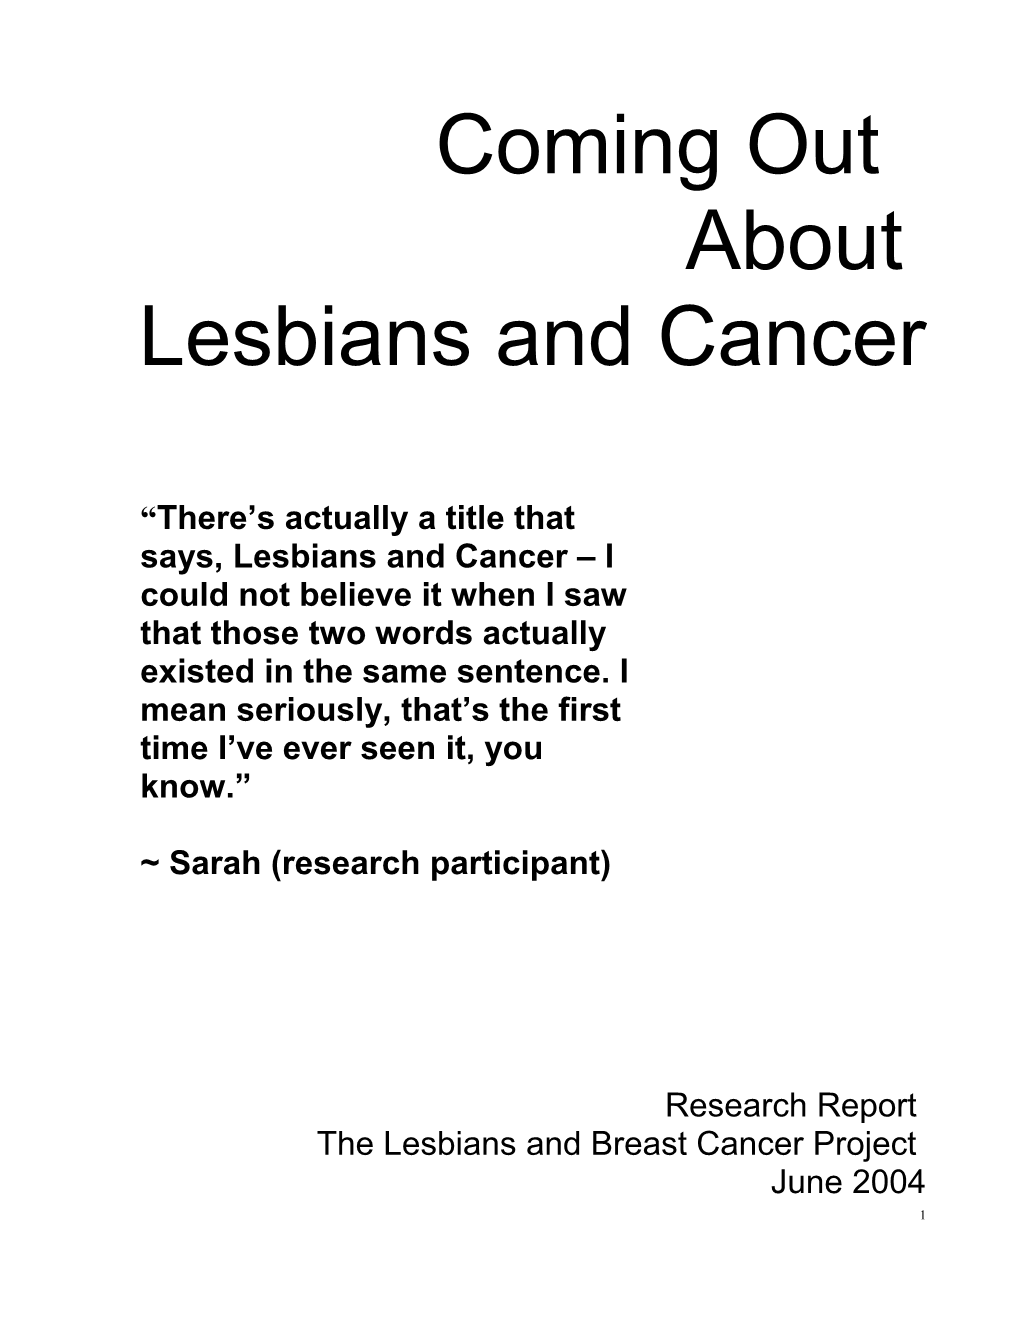 There S Actually a Title That Says, Lesbians and Cancer I Could Not Believe It When I